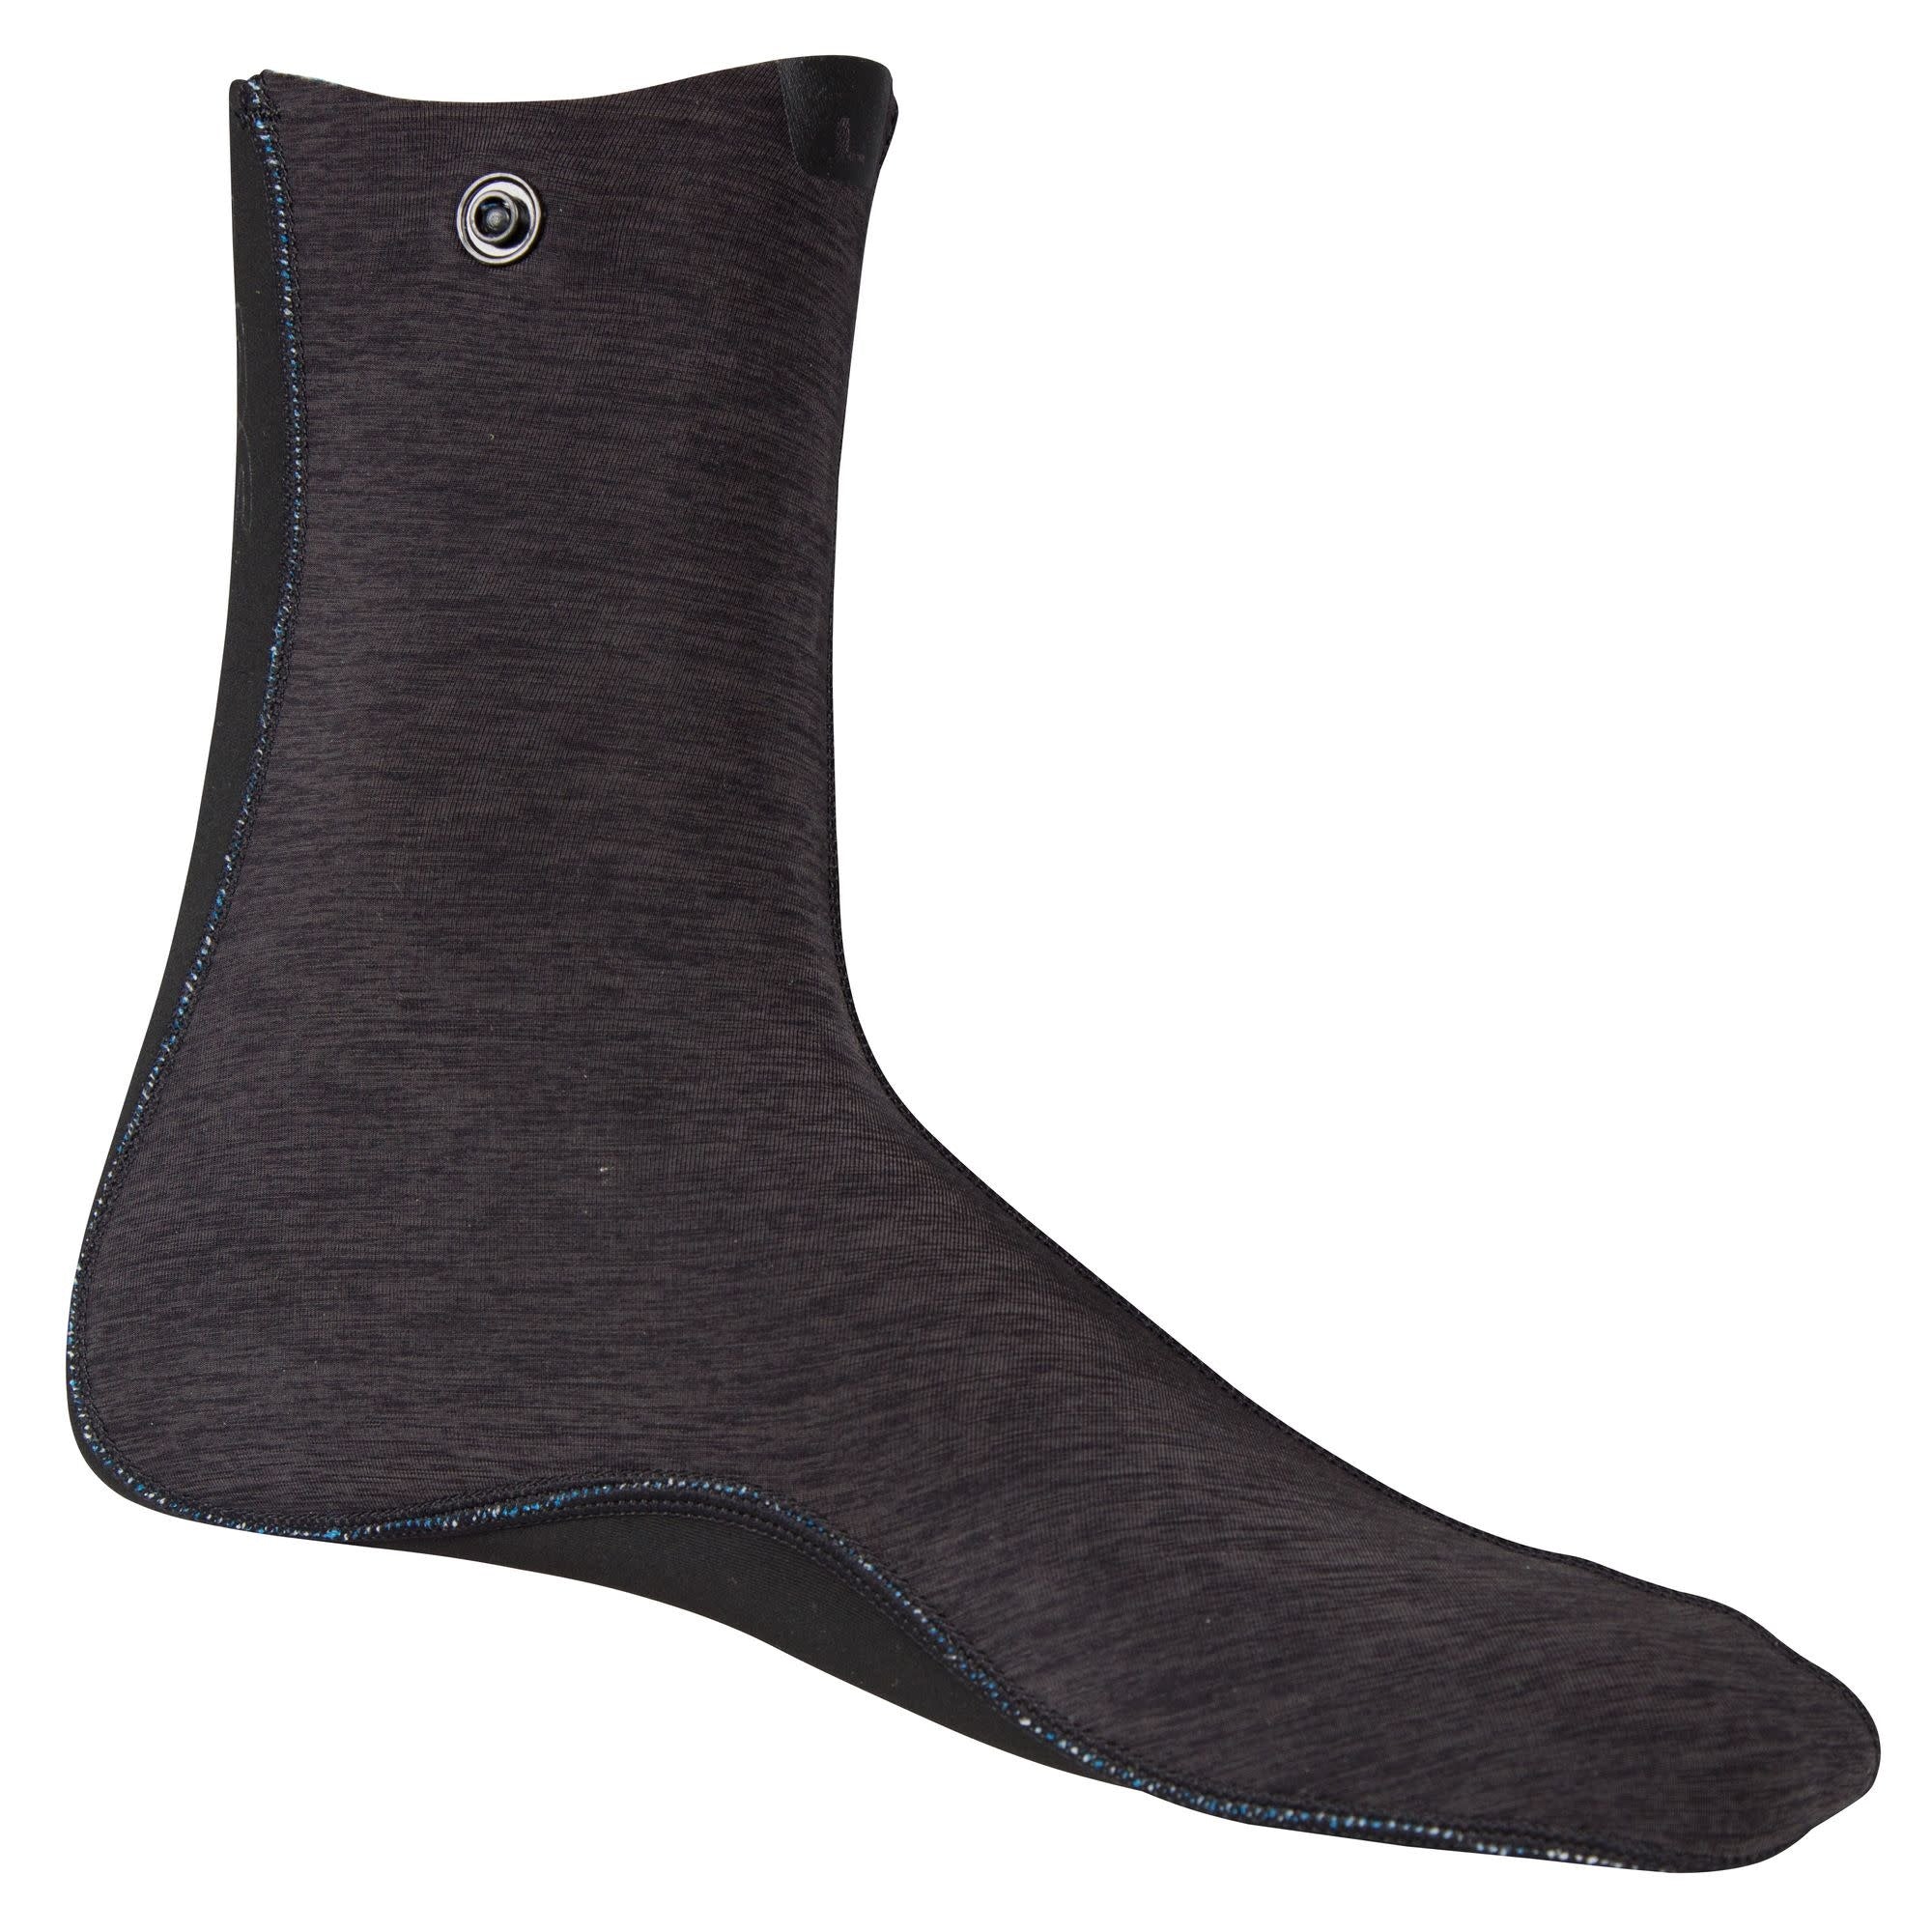 NRS - Hydroskin Wetsock - Frontenac Outfitters